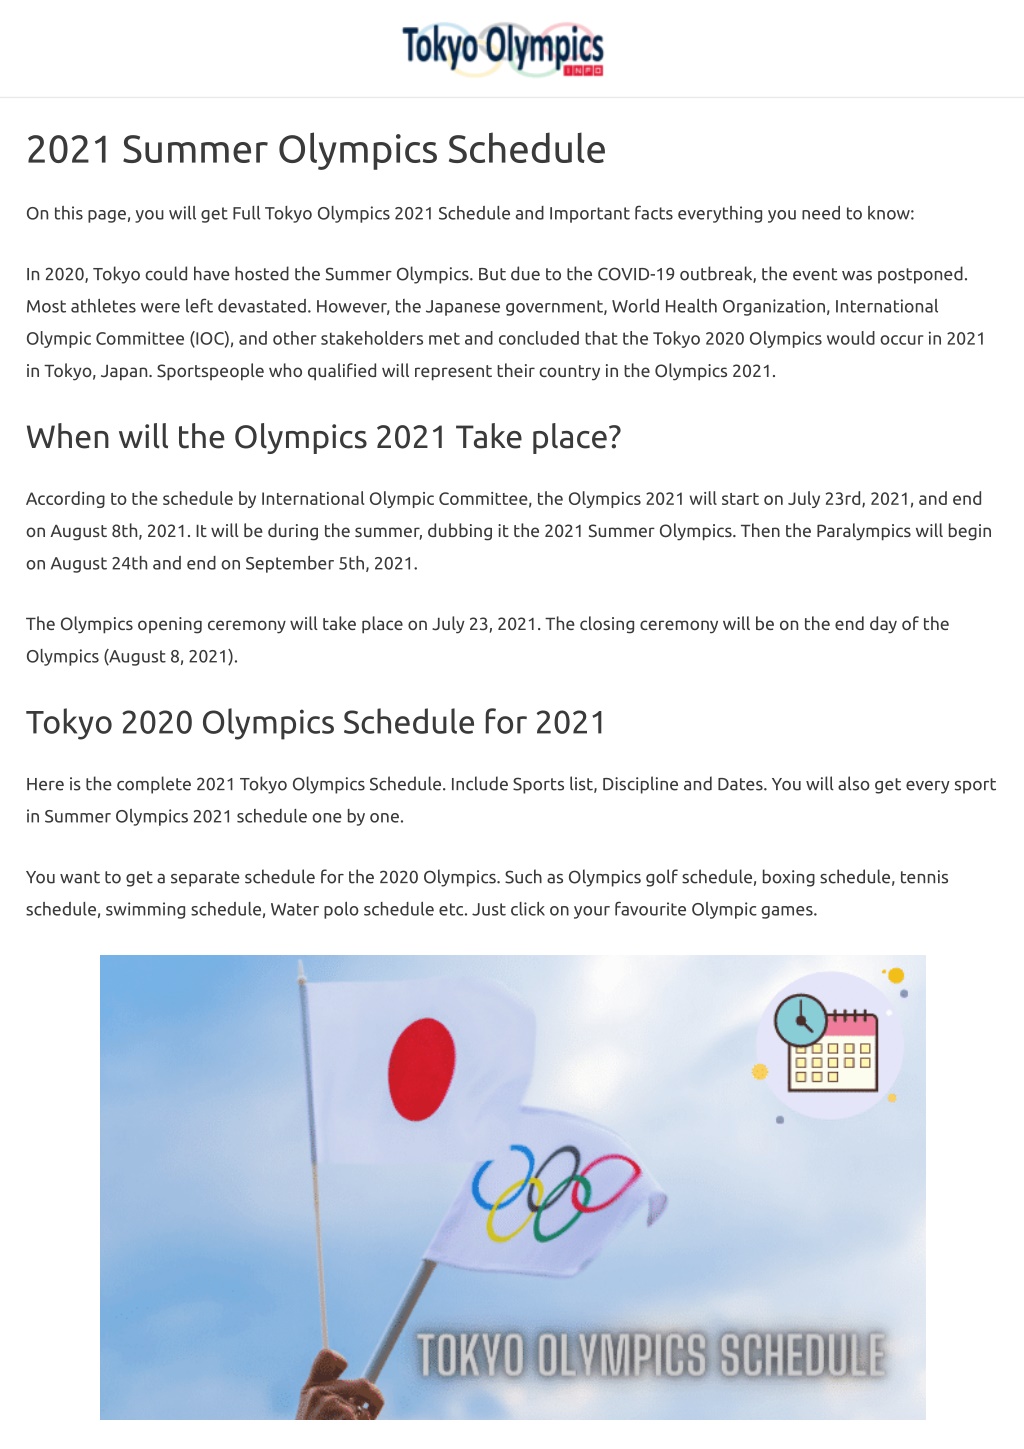 olympic games tokyo 2020 schedule and results